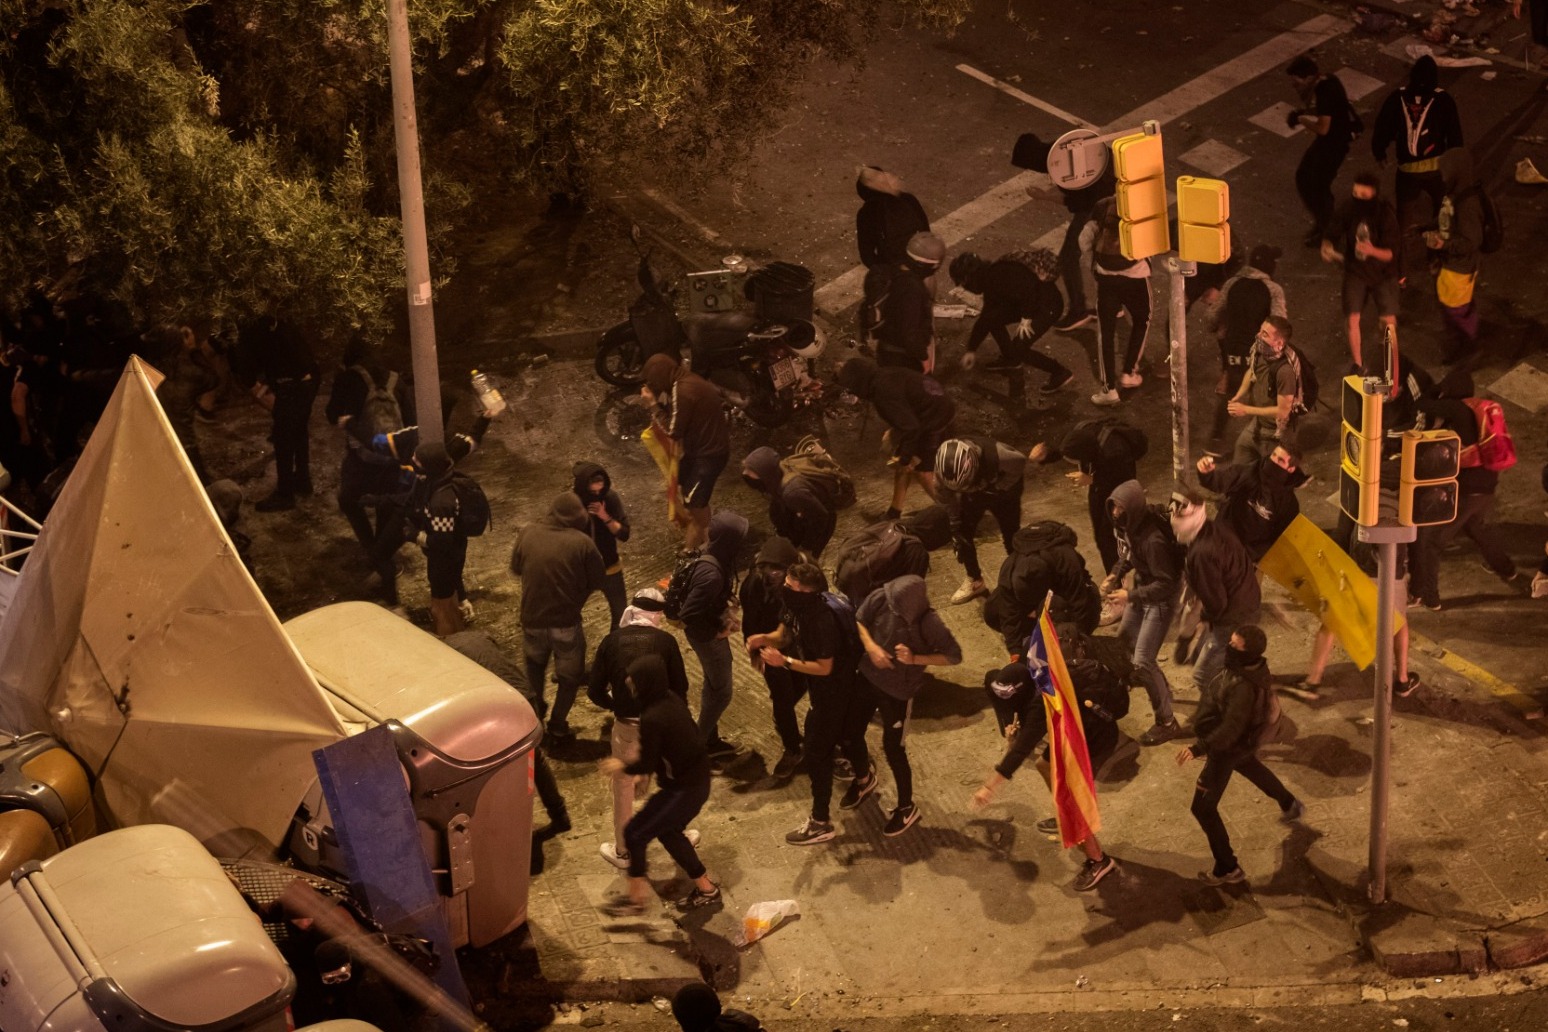 POLICE FIRE TEAR GAS AND RUBBER BULLETS IN BARCELONA 